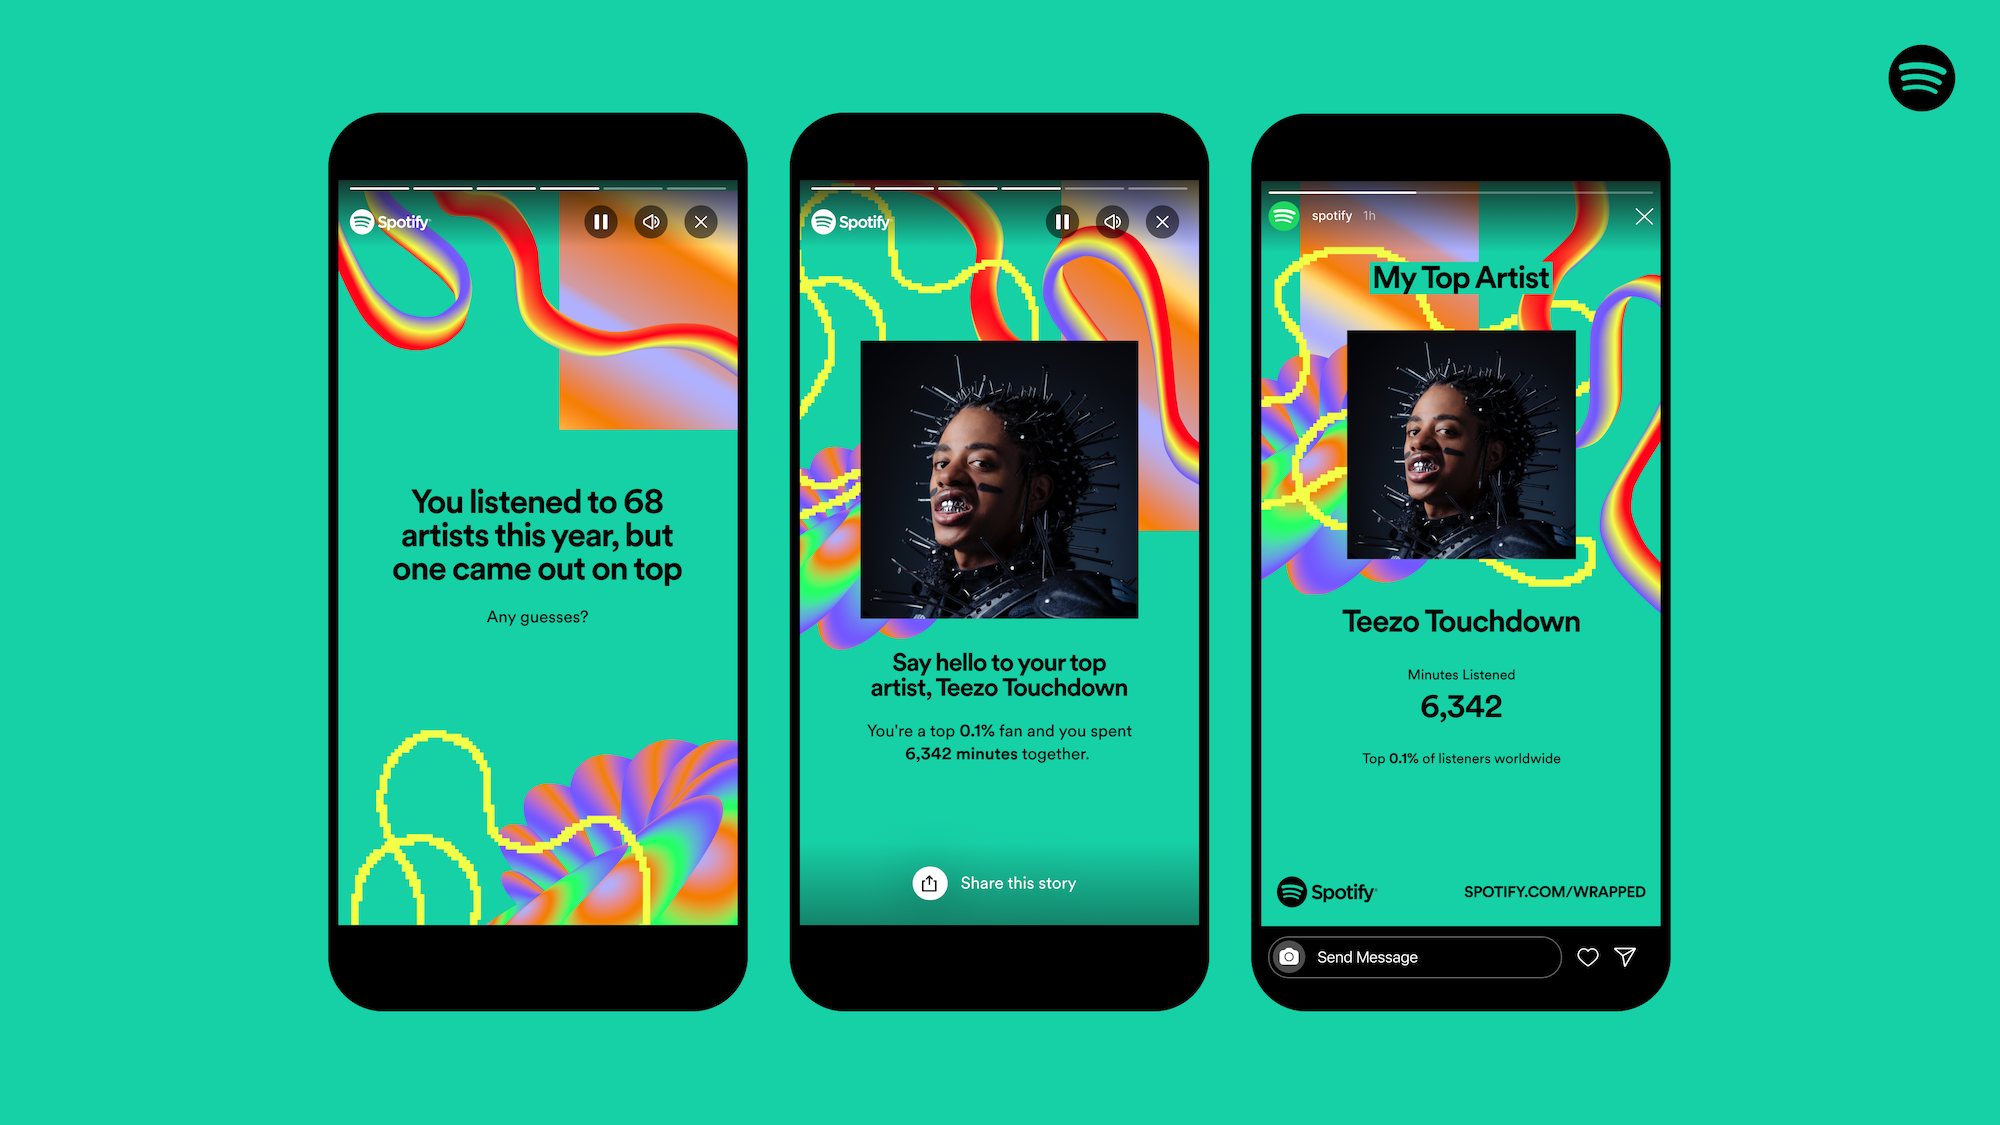 Spotify’s Wrapped campaign with artist images against a green background and psychedelic swirls.